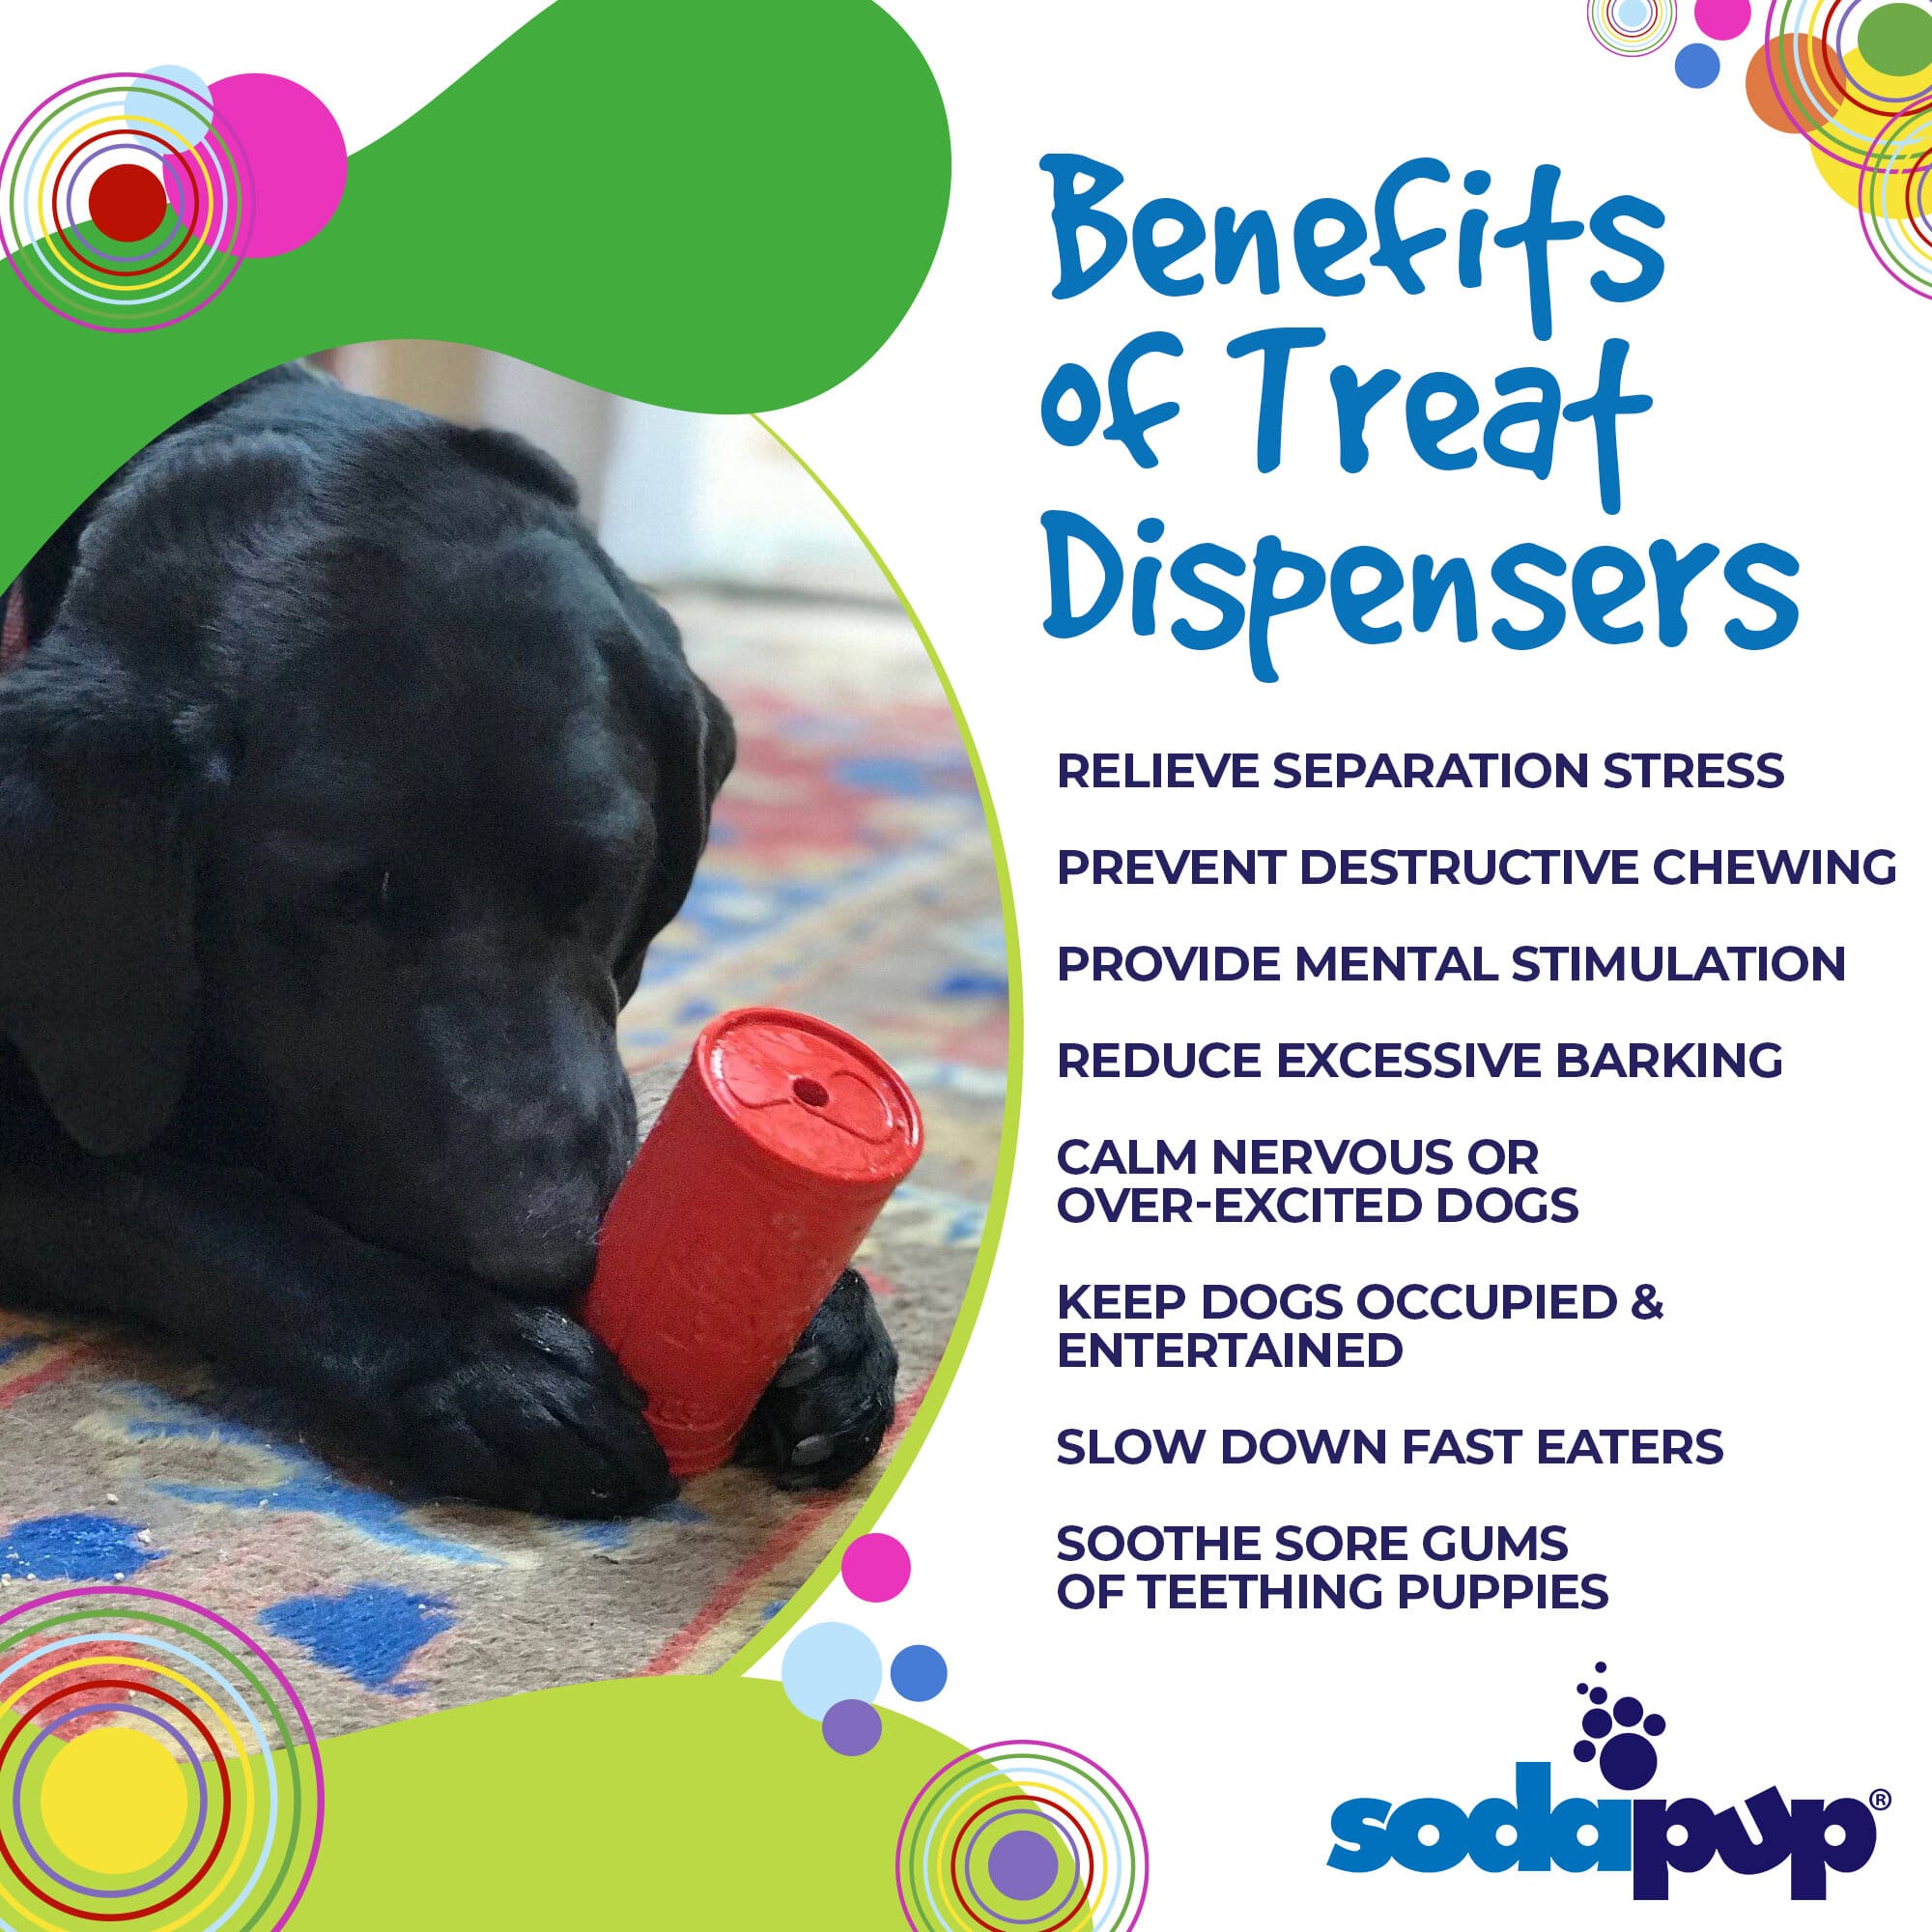 SodaPup Corn on the Cup – Durable Dog Treat Dispenser & Chew Toy Made in  USA from Non-Toxic, Pet Safe, Food Safe Natural Rubber material for Mental